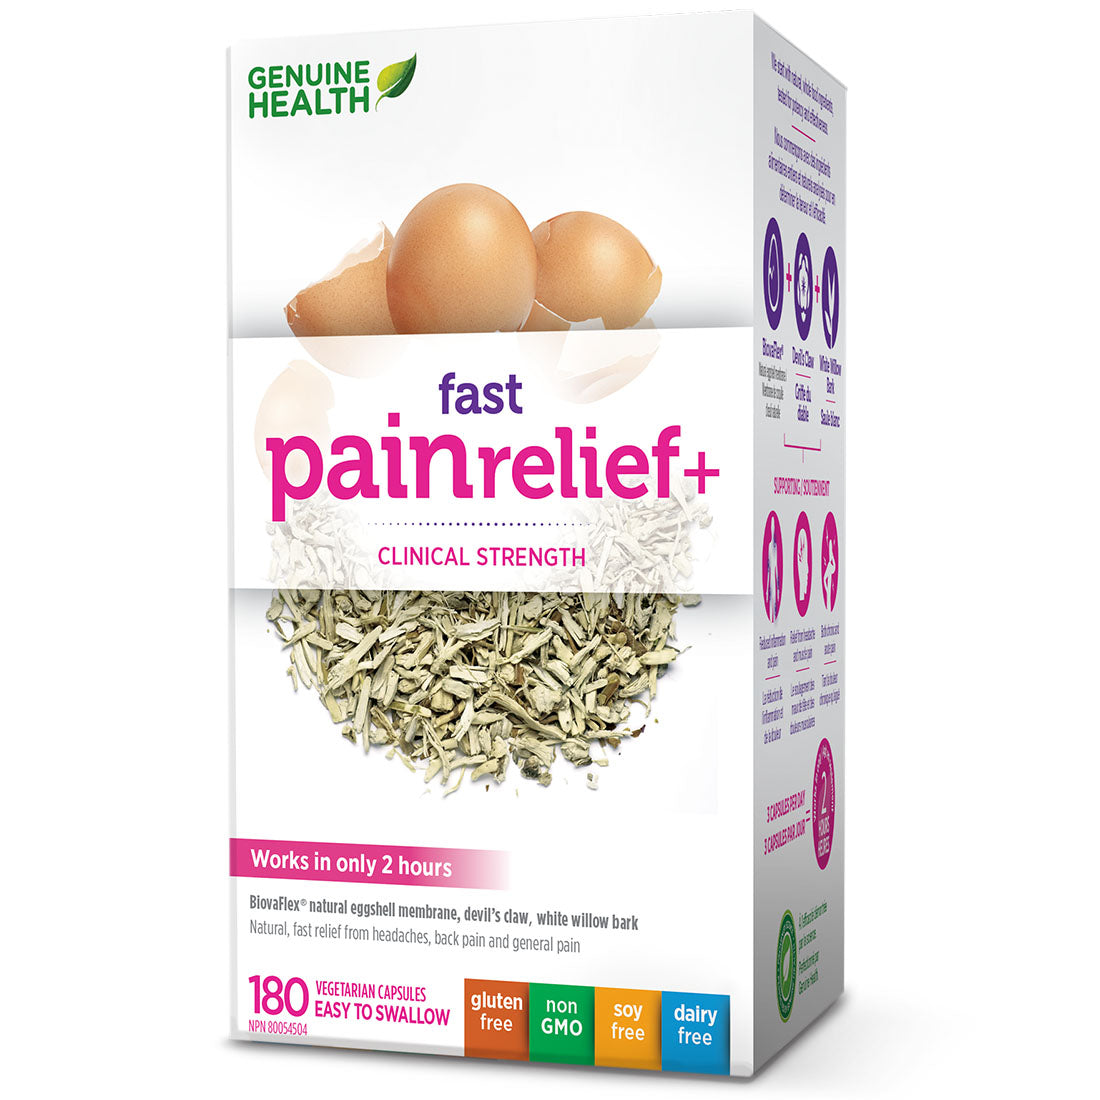 Genuine Health Fast Pain Relief+